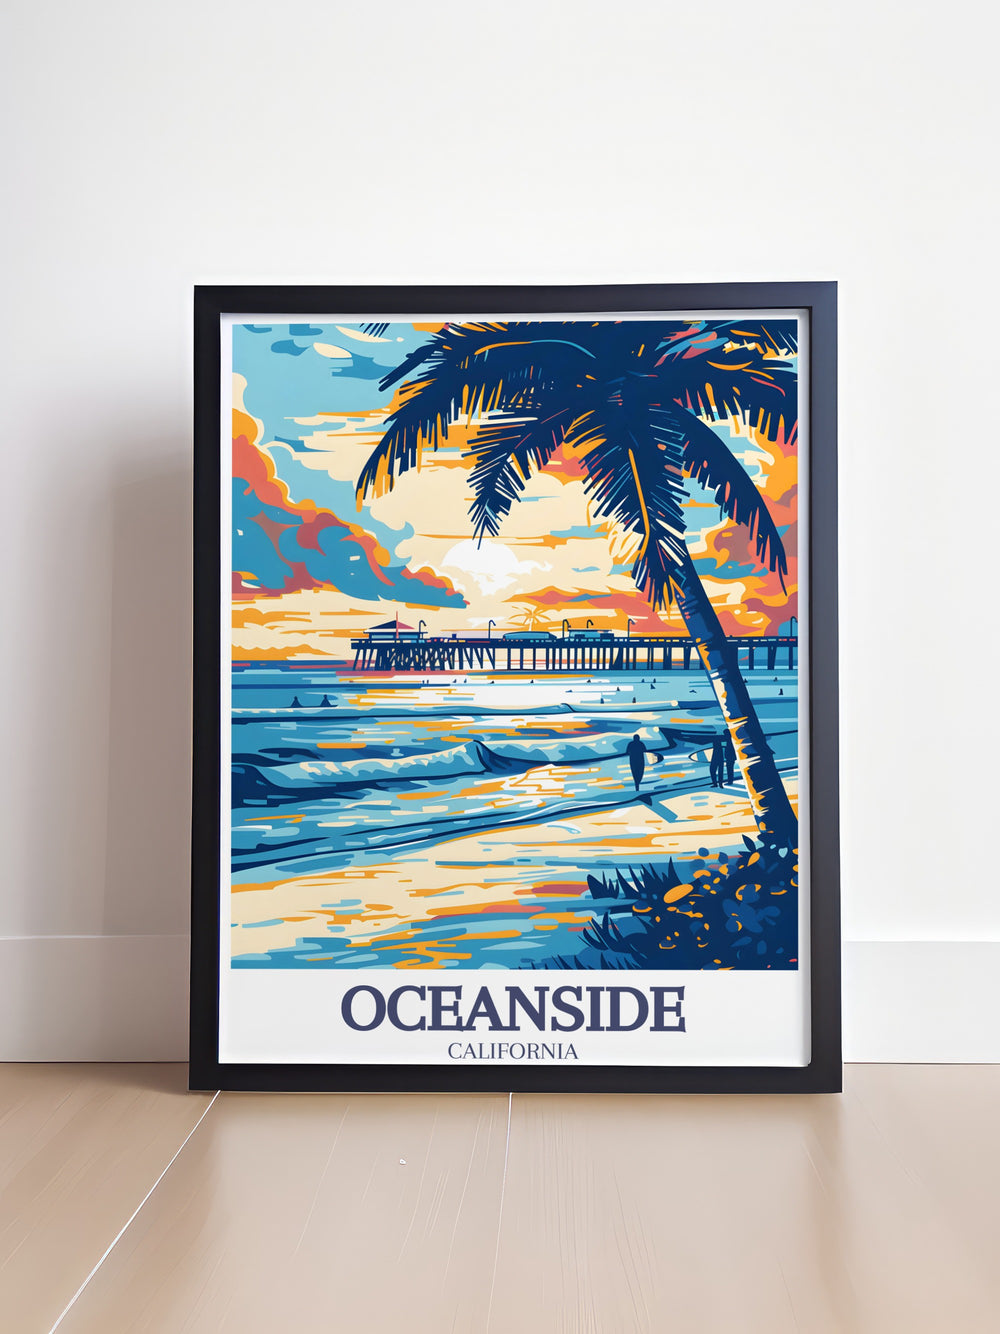 Oceanside Beach and Oceanside Pier poster featuring the iconic pier against a backdrop of serene beach scenes ideal for adding a touch of California charm to your walls and making a thoughtful gift for California lovers